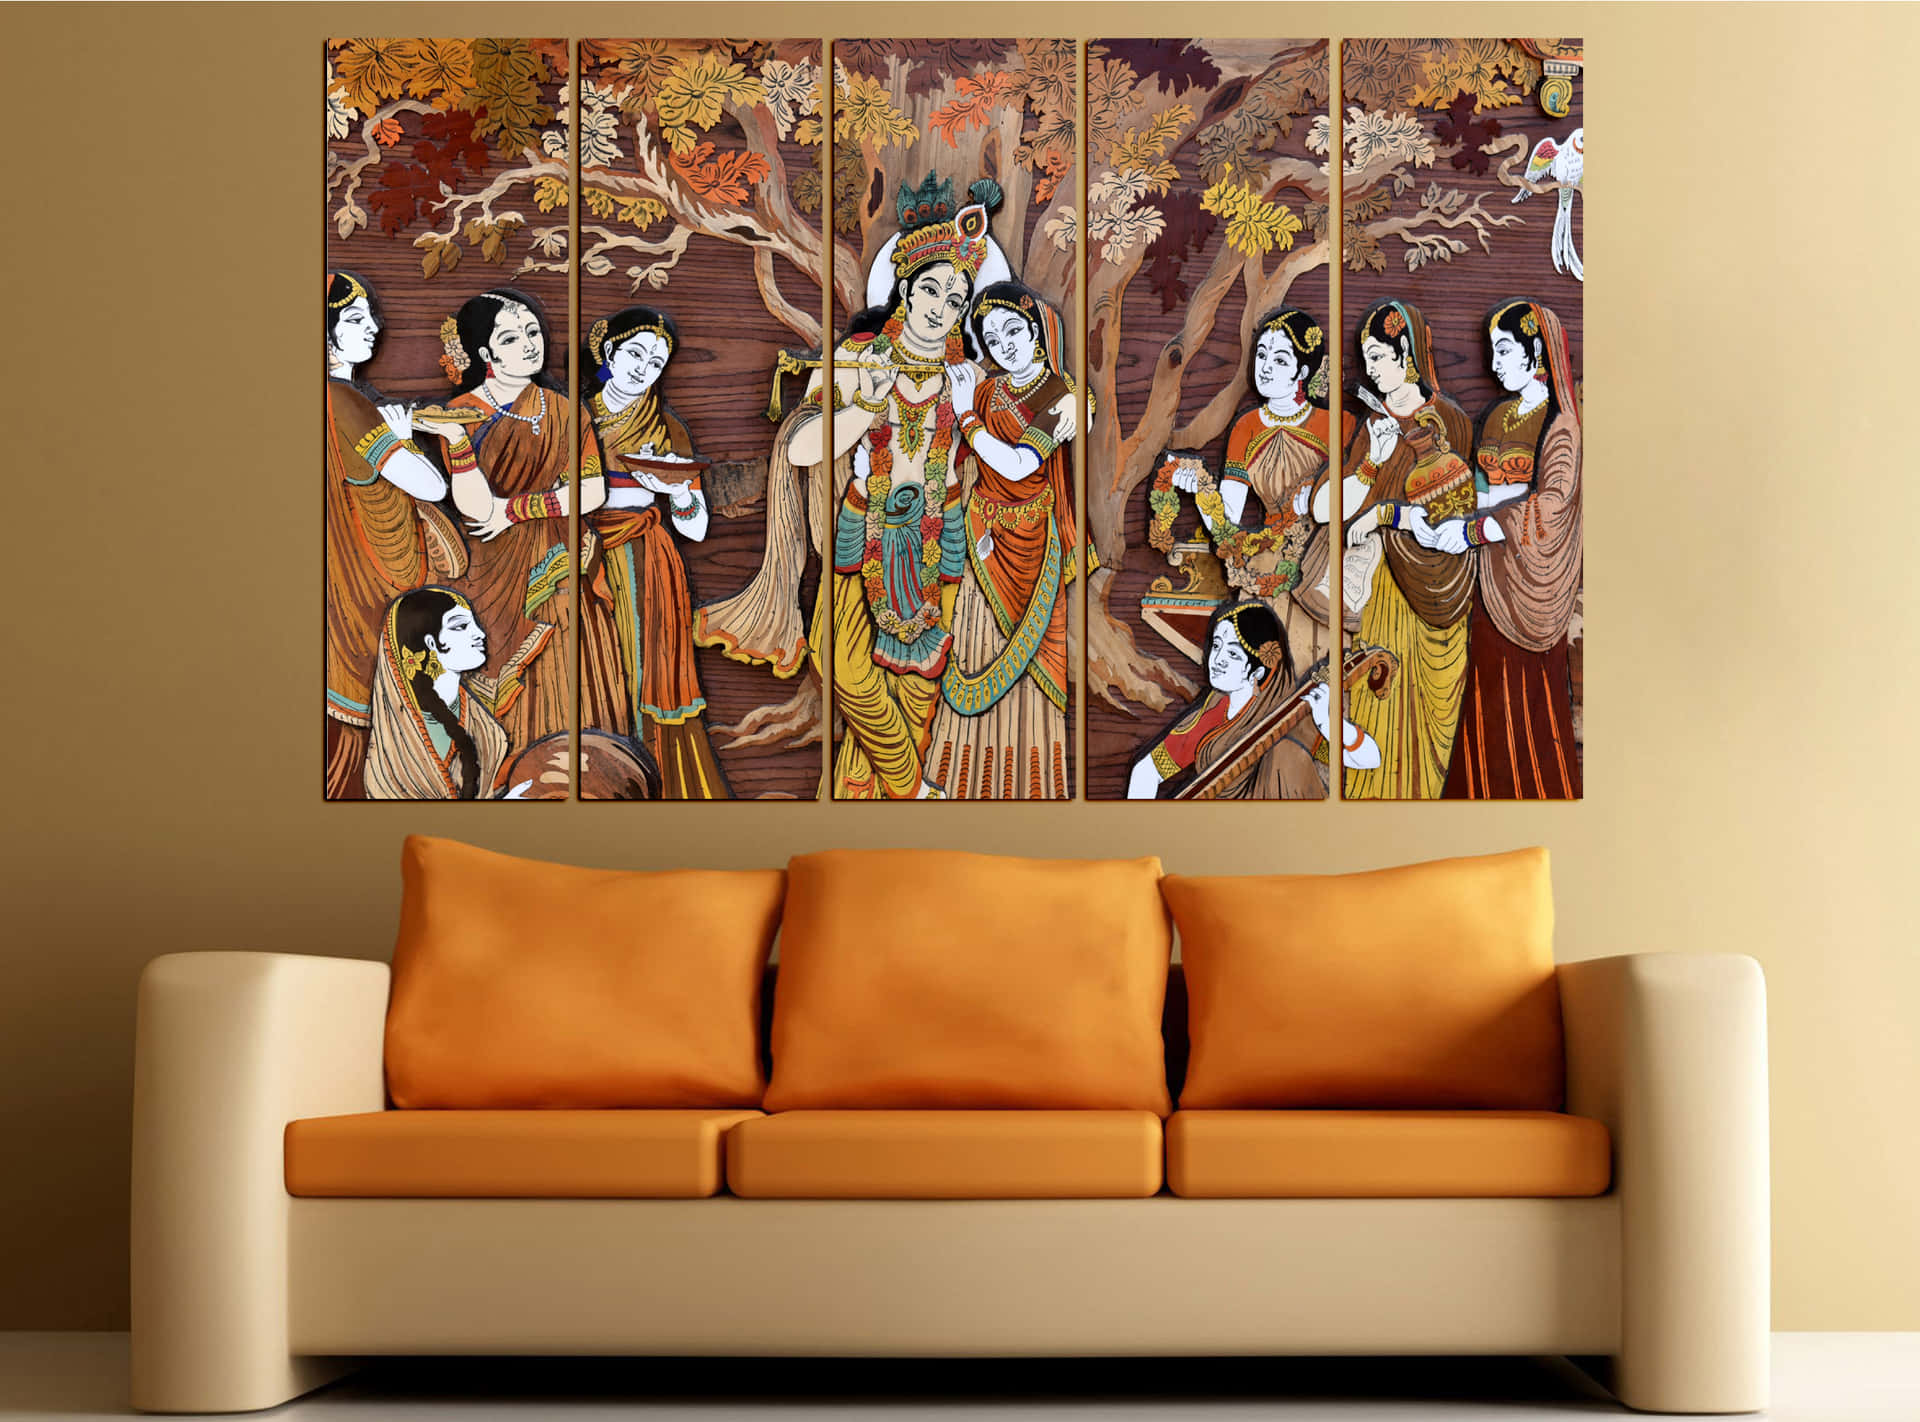 A vivid example of wall painting artistry